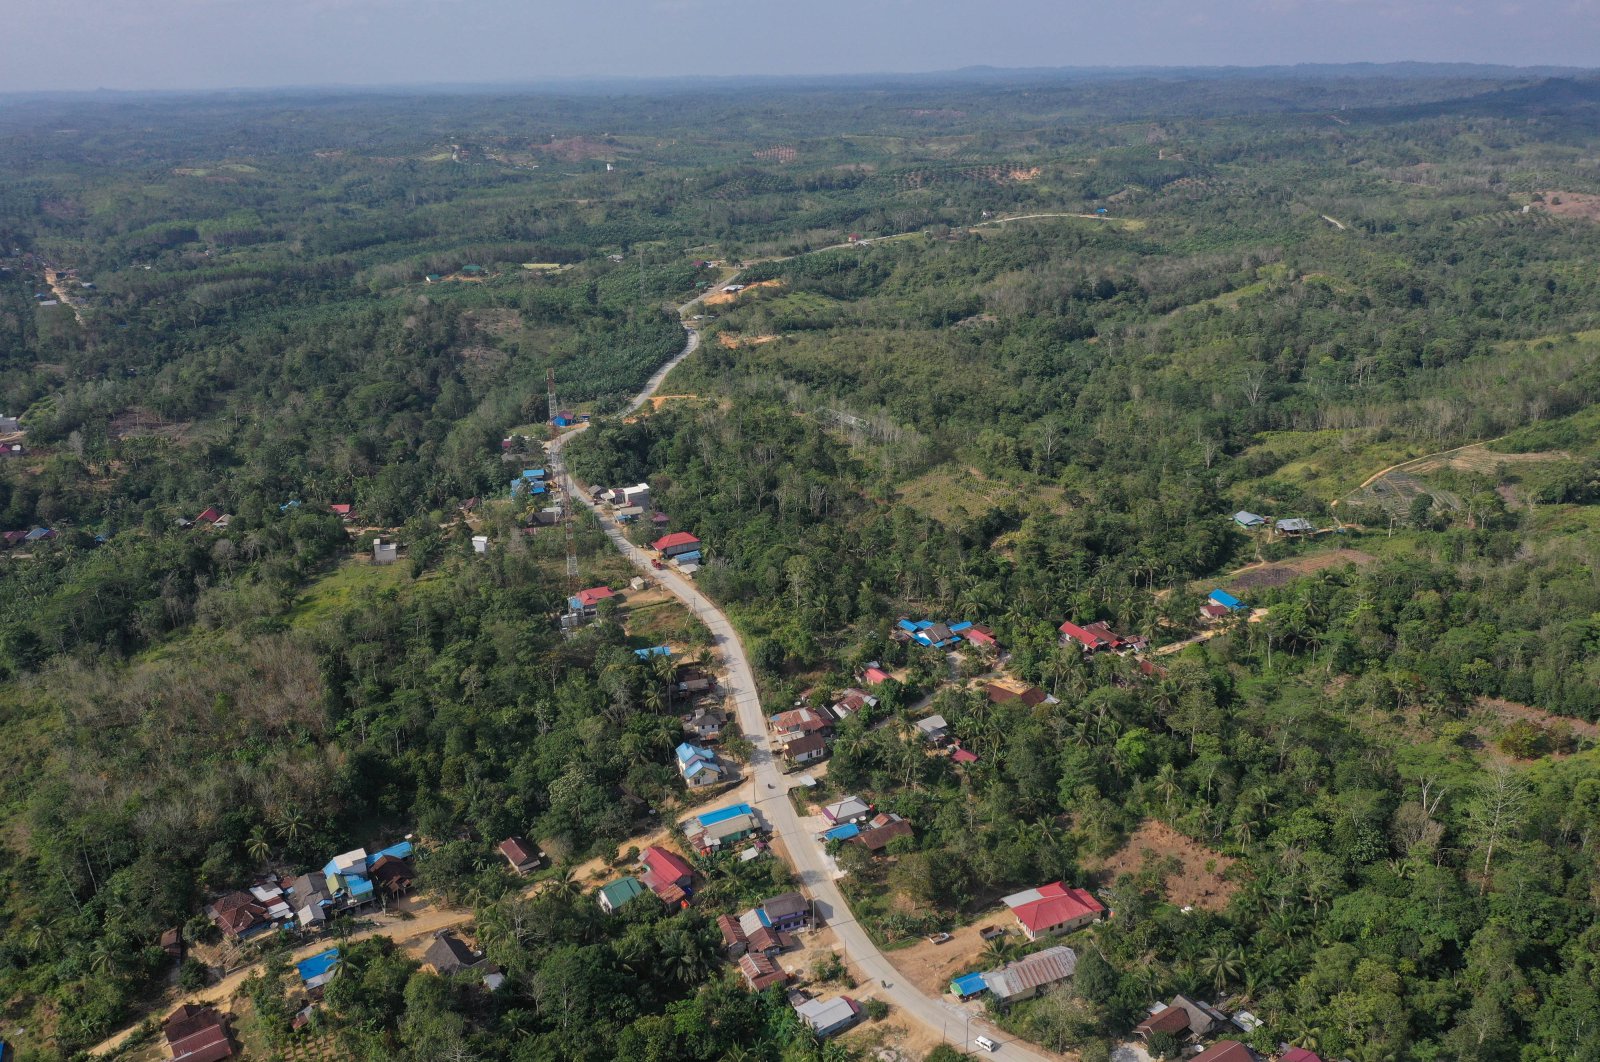 An aerial view of Sepaku district in North Penajam Paser, East Kalimantan province, Indonesia, Aug. 28, 2019. (Reuters Photo)